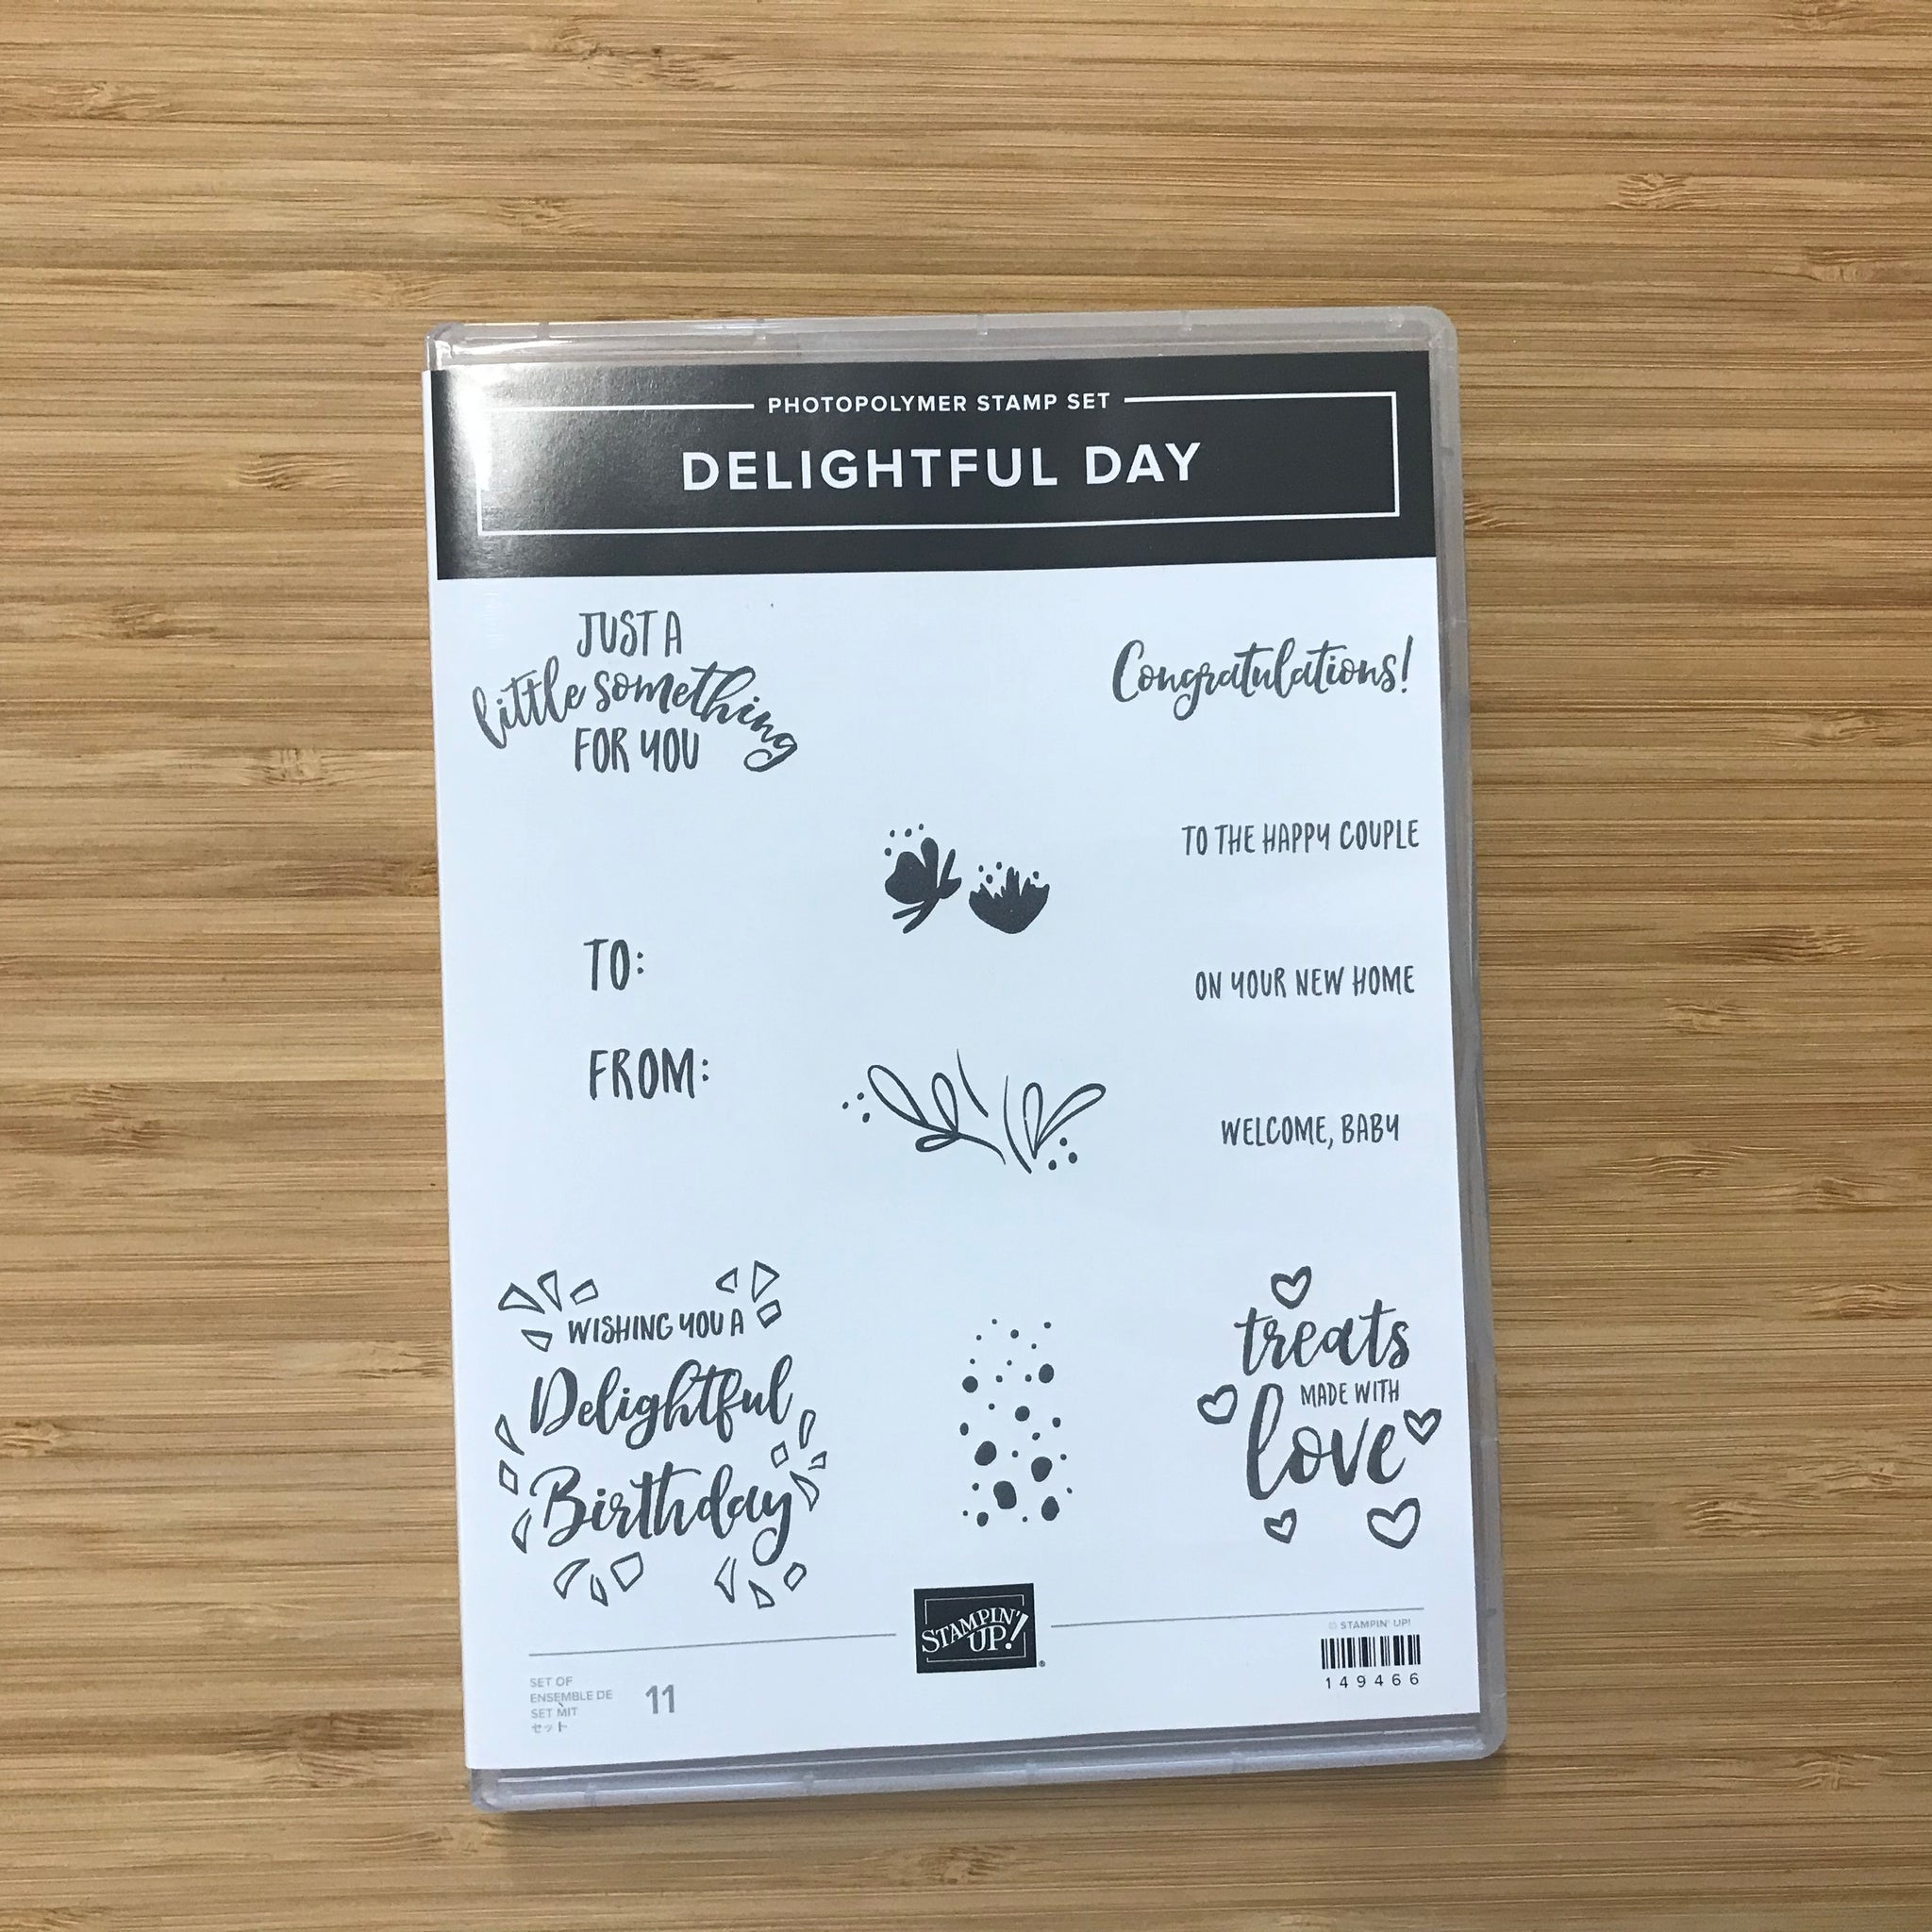 Delightful Day | Retired Photopolymer Stamp Set | Stampin' Up!®